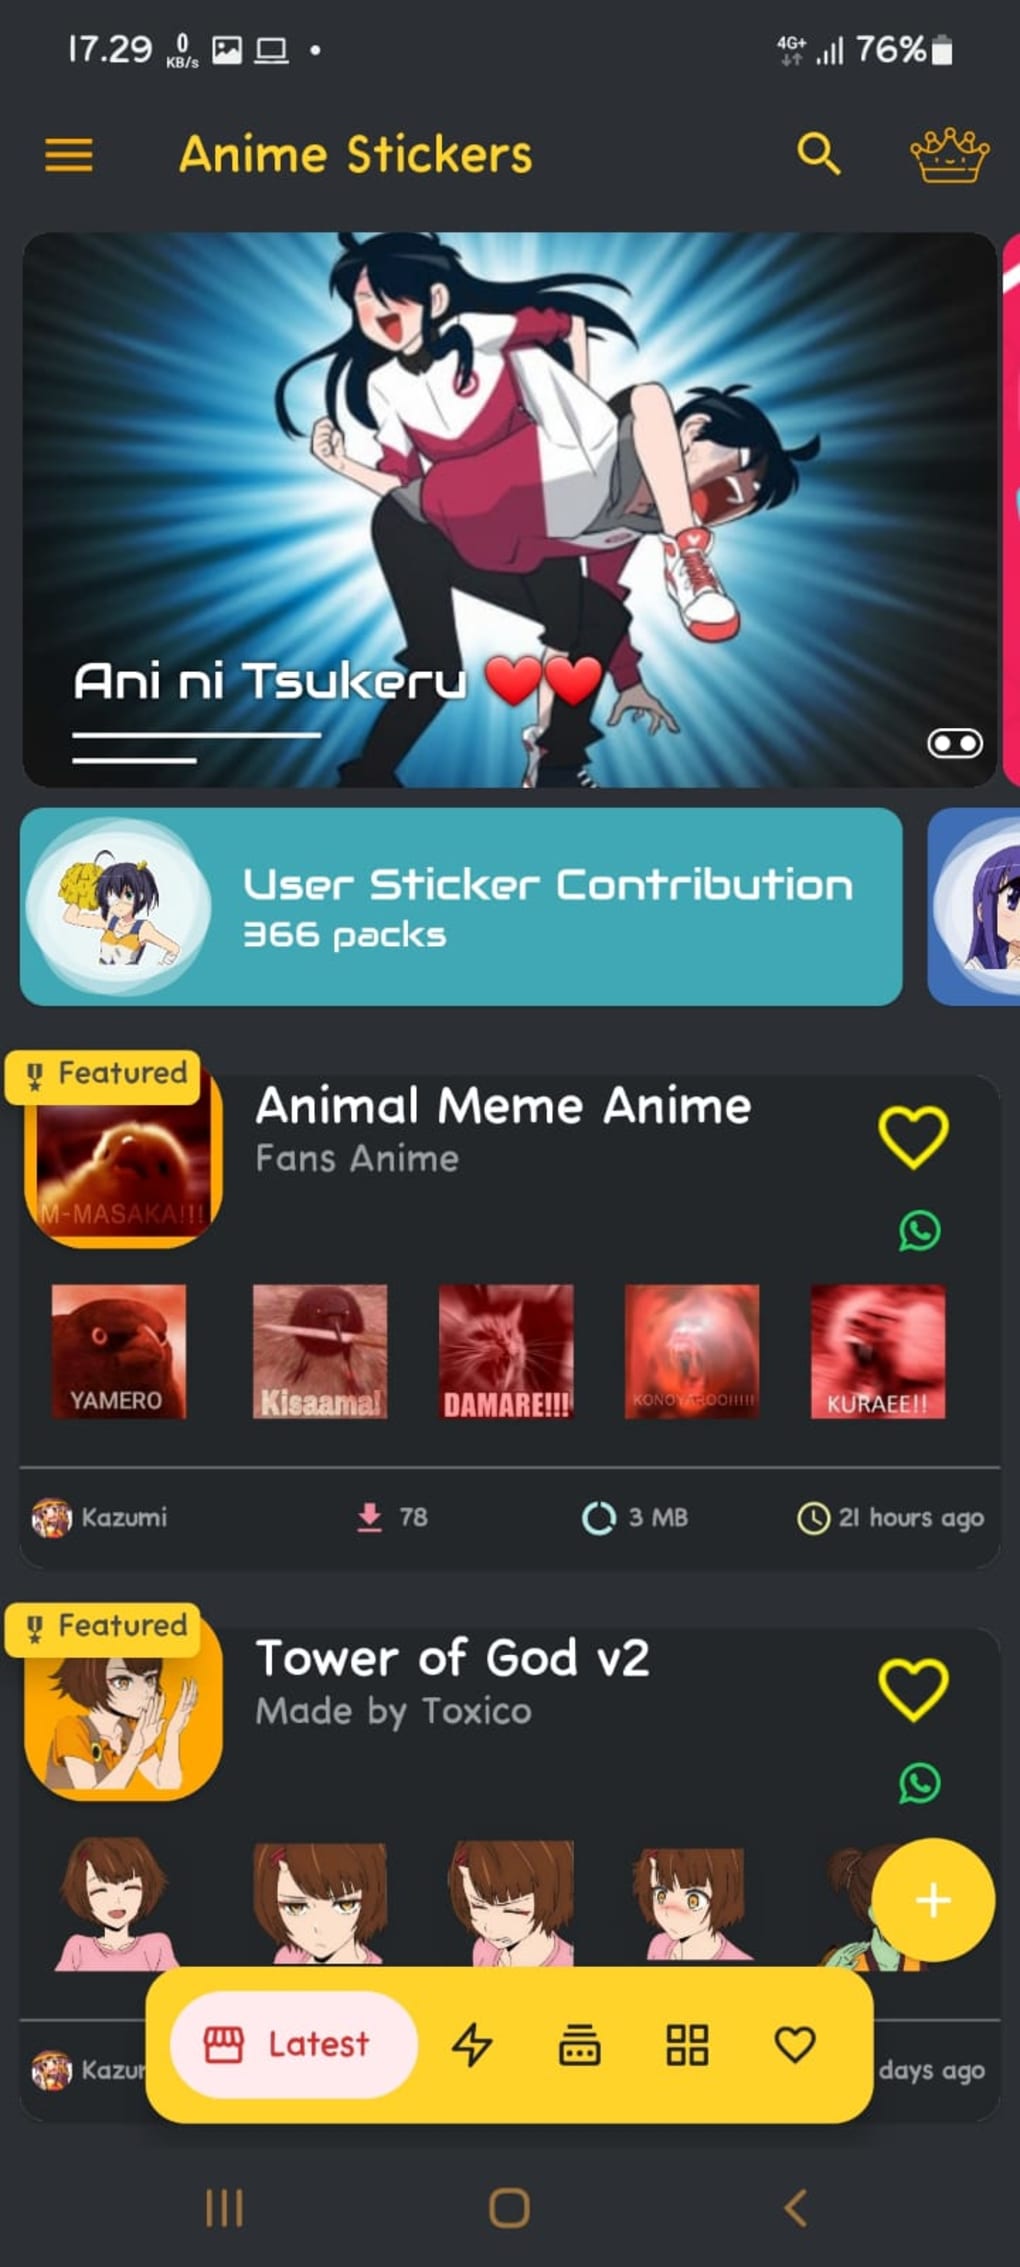 12 BEST FREE OFFLINE VIEWING ANIME STREAMING APPS [ANDROID & IOS]